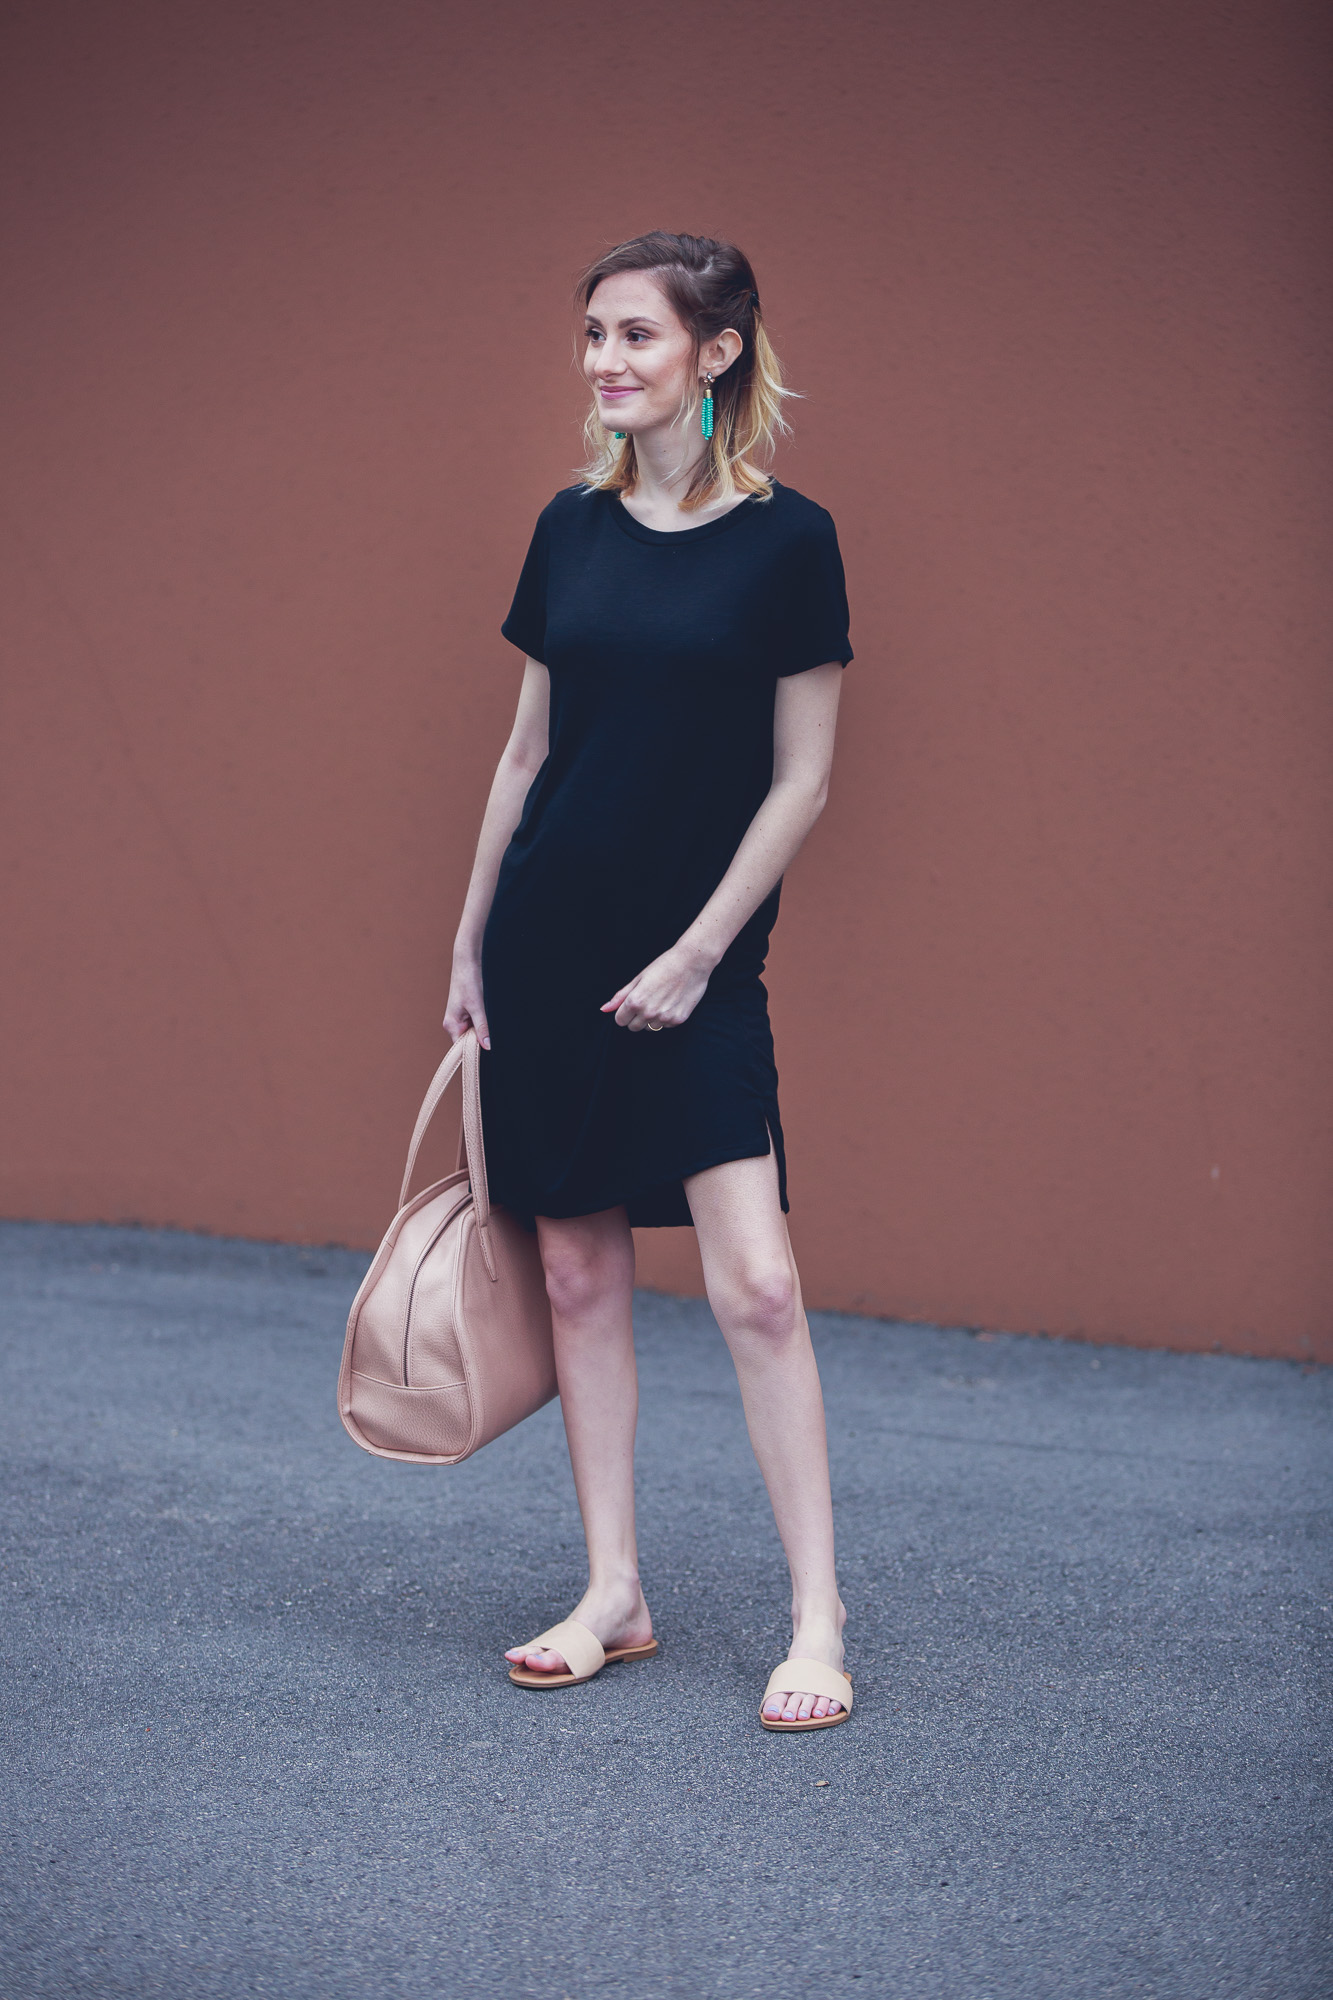 North Carolina lifestyle and fashion blogger, Jessica Linn, on Linn Style wearing a black t-shirt dress from Target, tan sandals from Forever21, Baublebar necklace, and carrying a Matt and Nat purse.